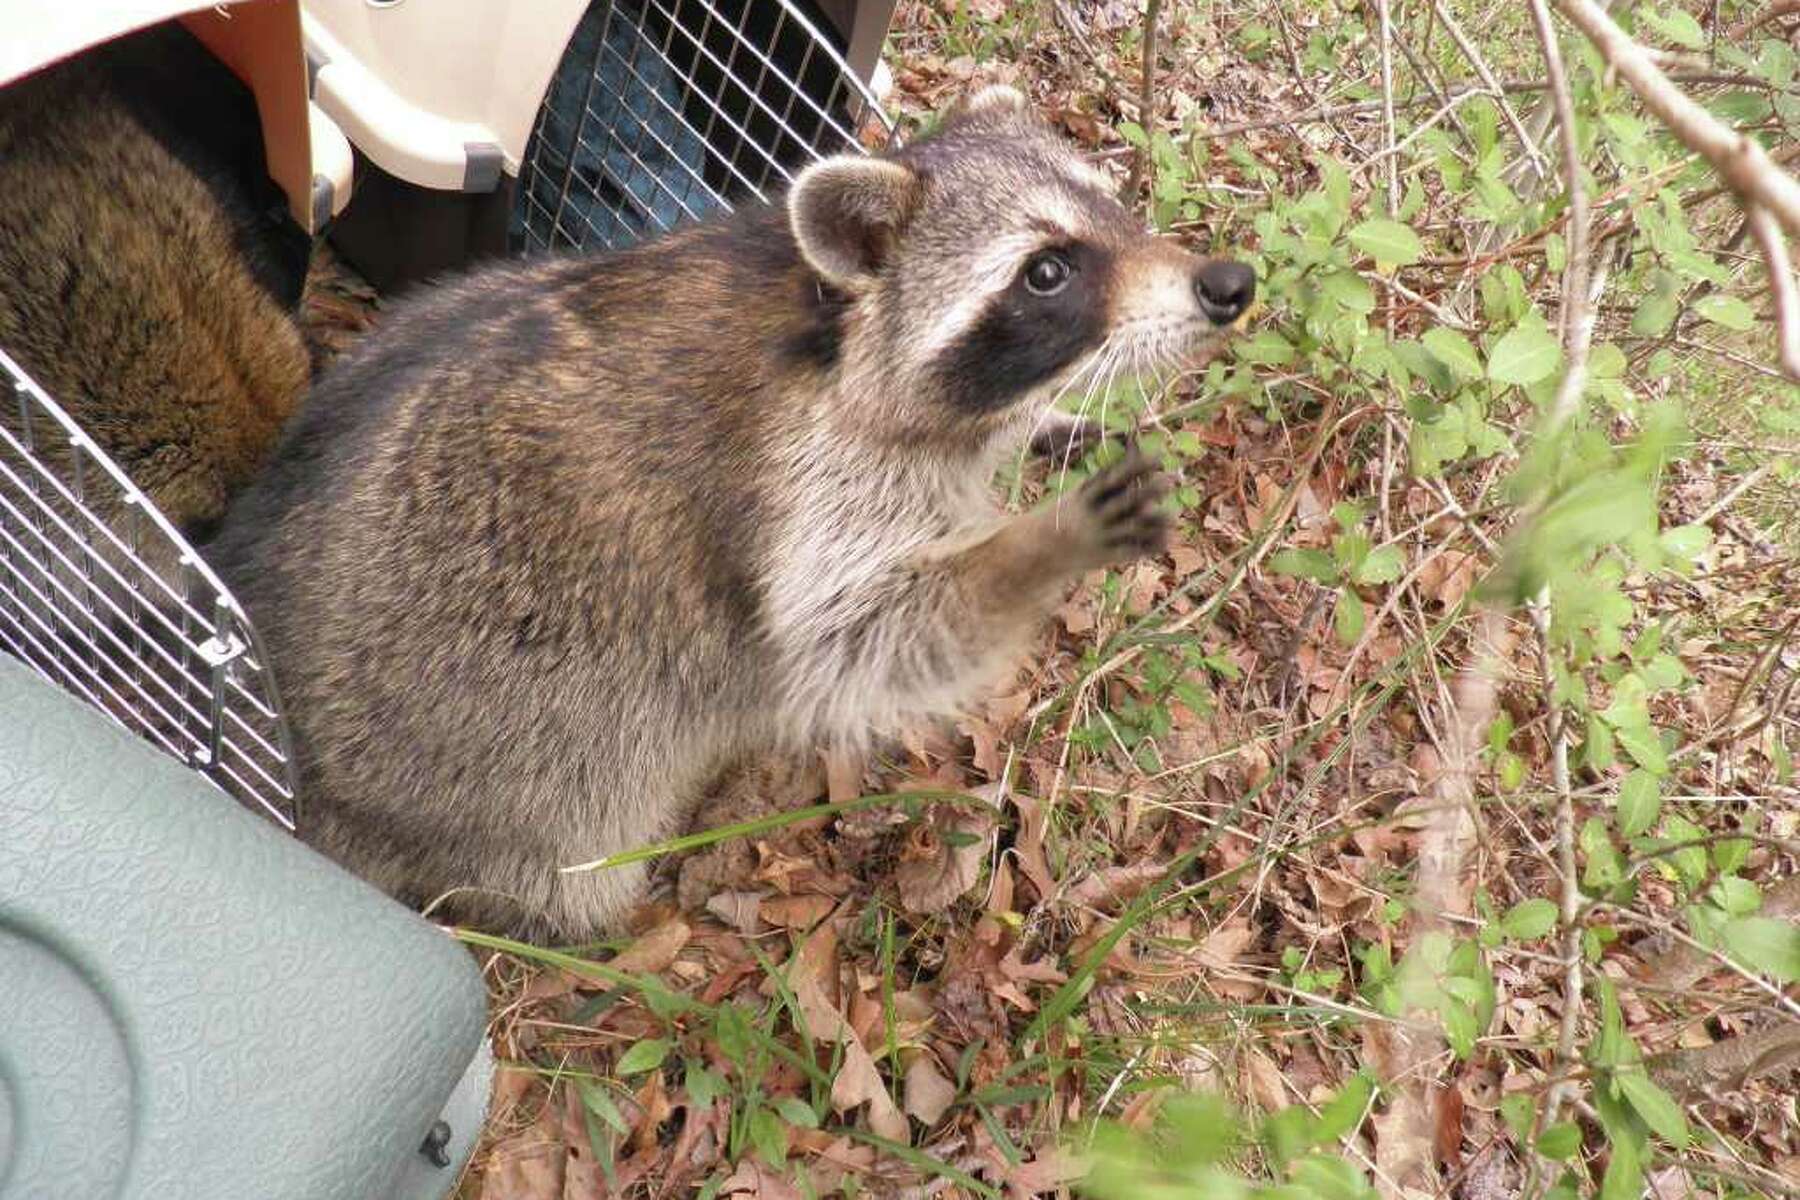 Friends of Texas Wildlife to hold supply drive in Magnolia